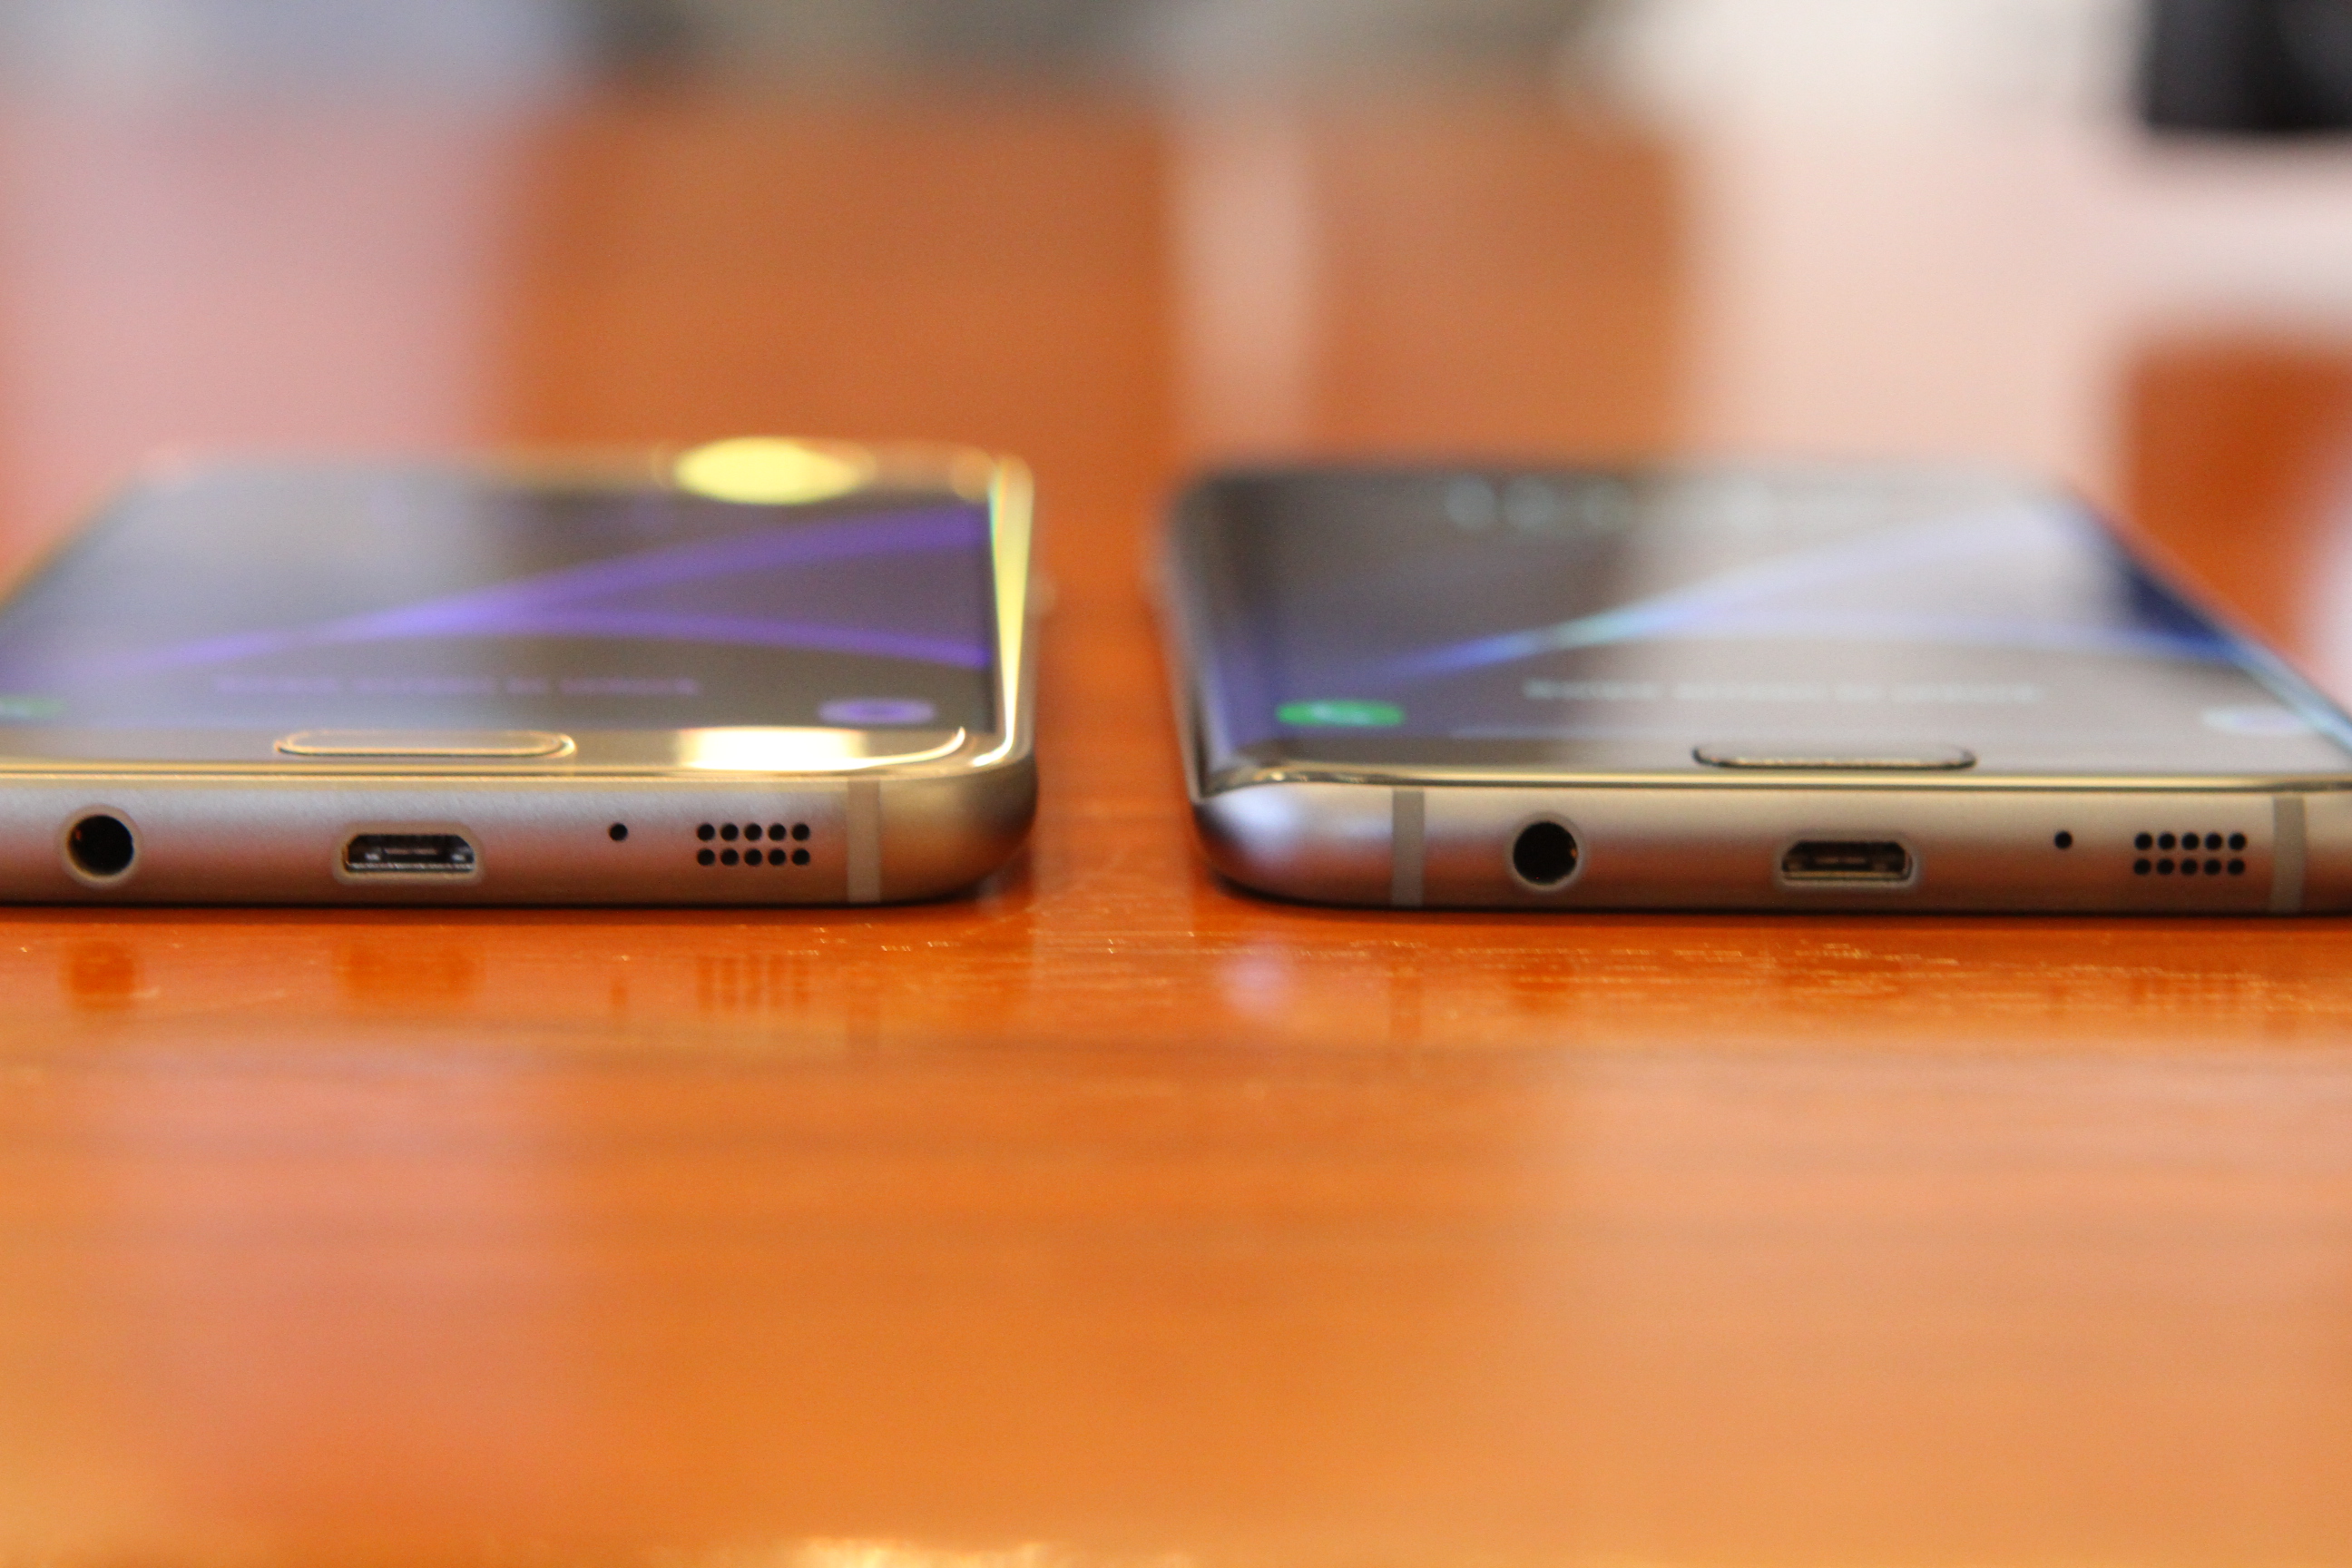 Image of Samsung's newest Galaxy S7 and S7 edge smartphones.